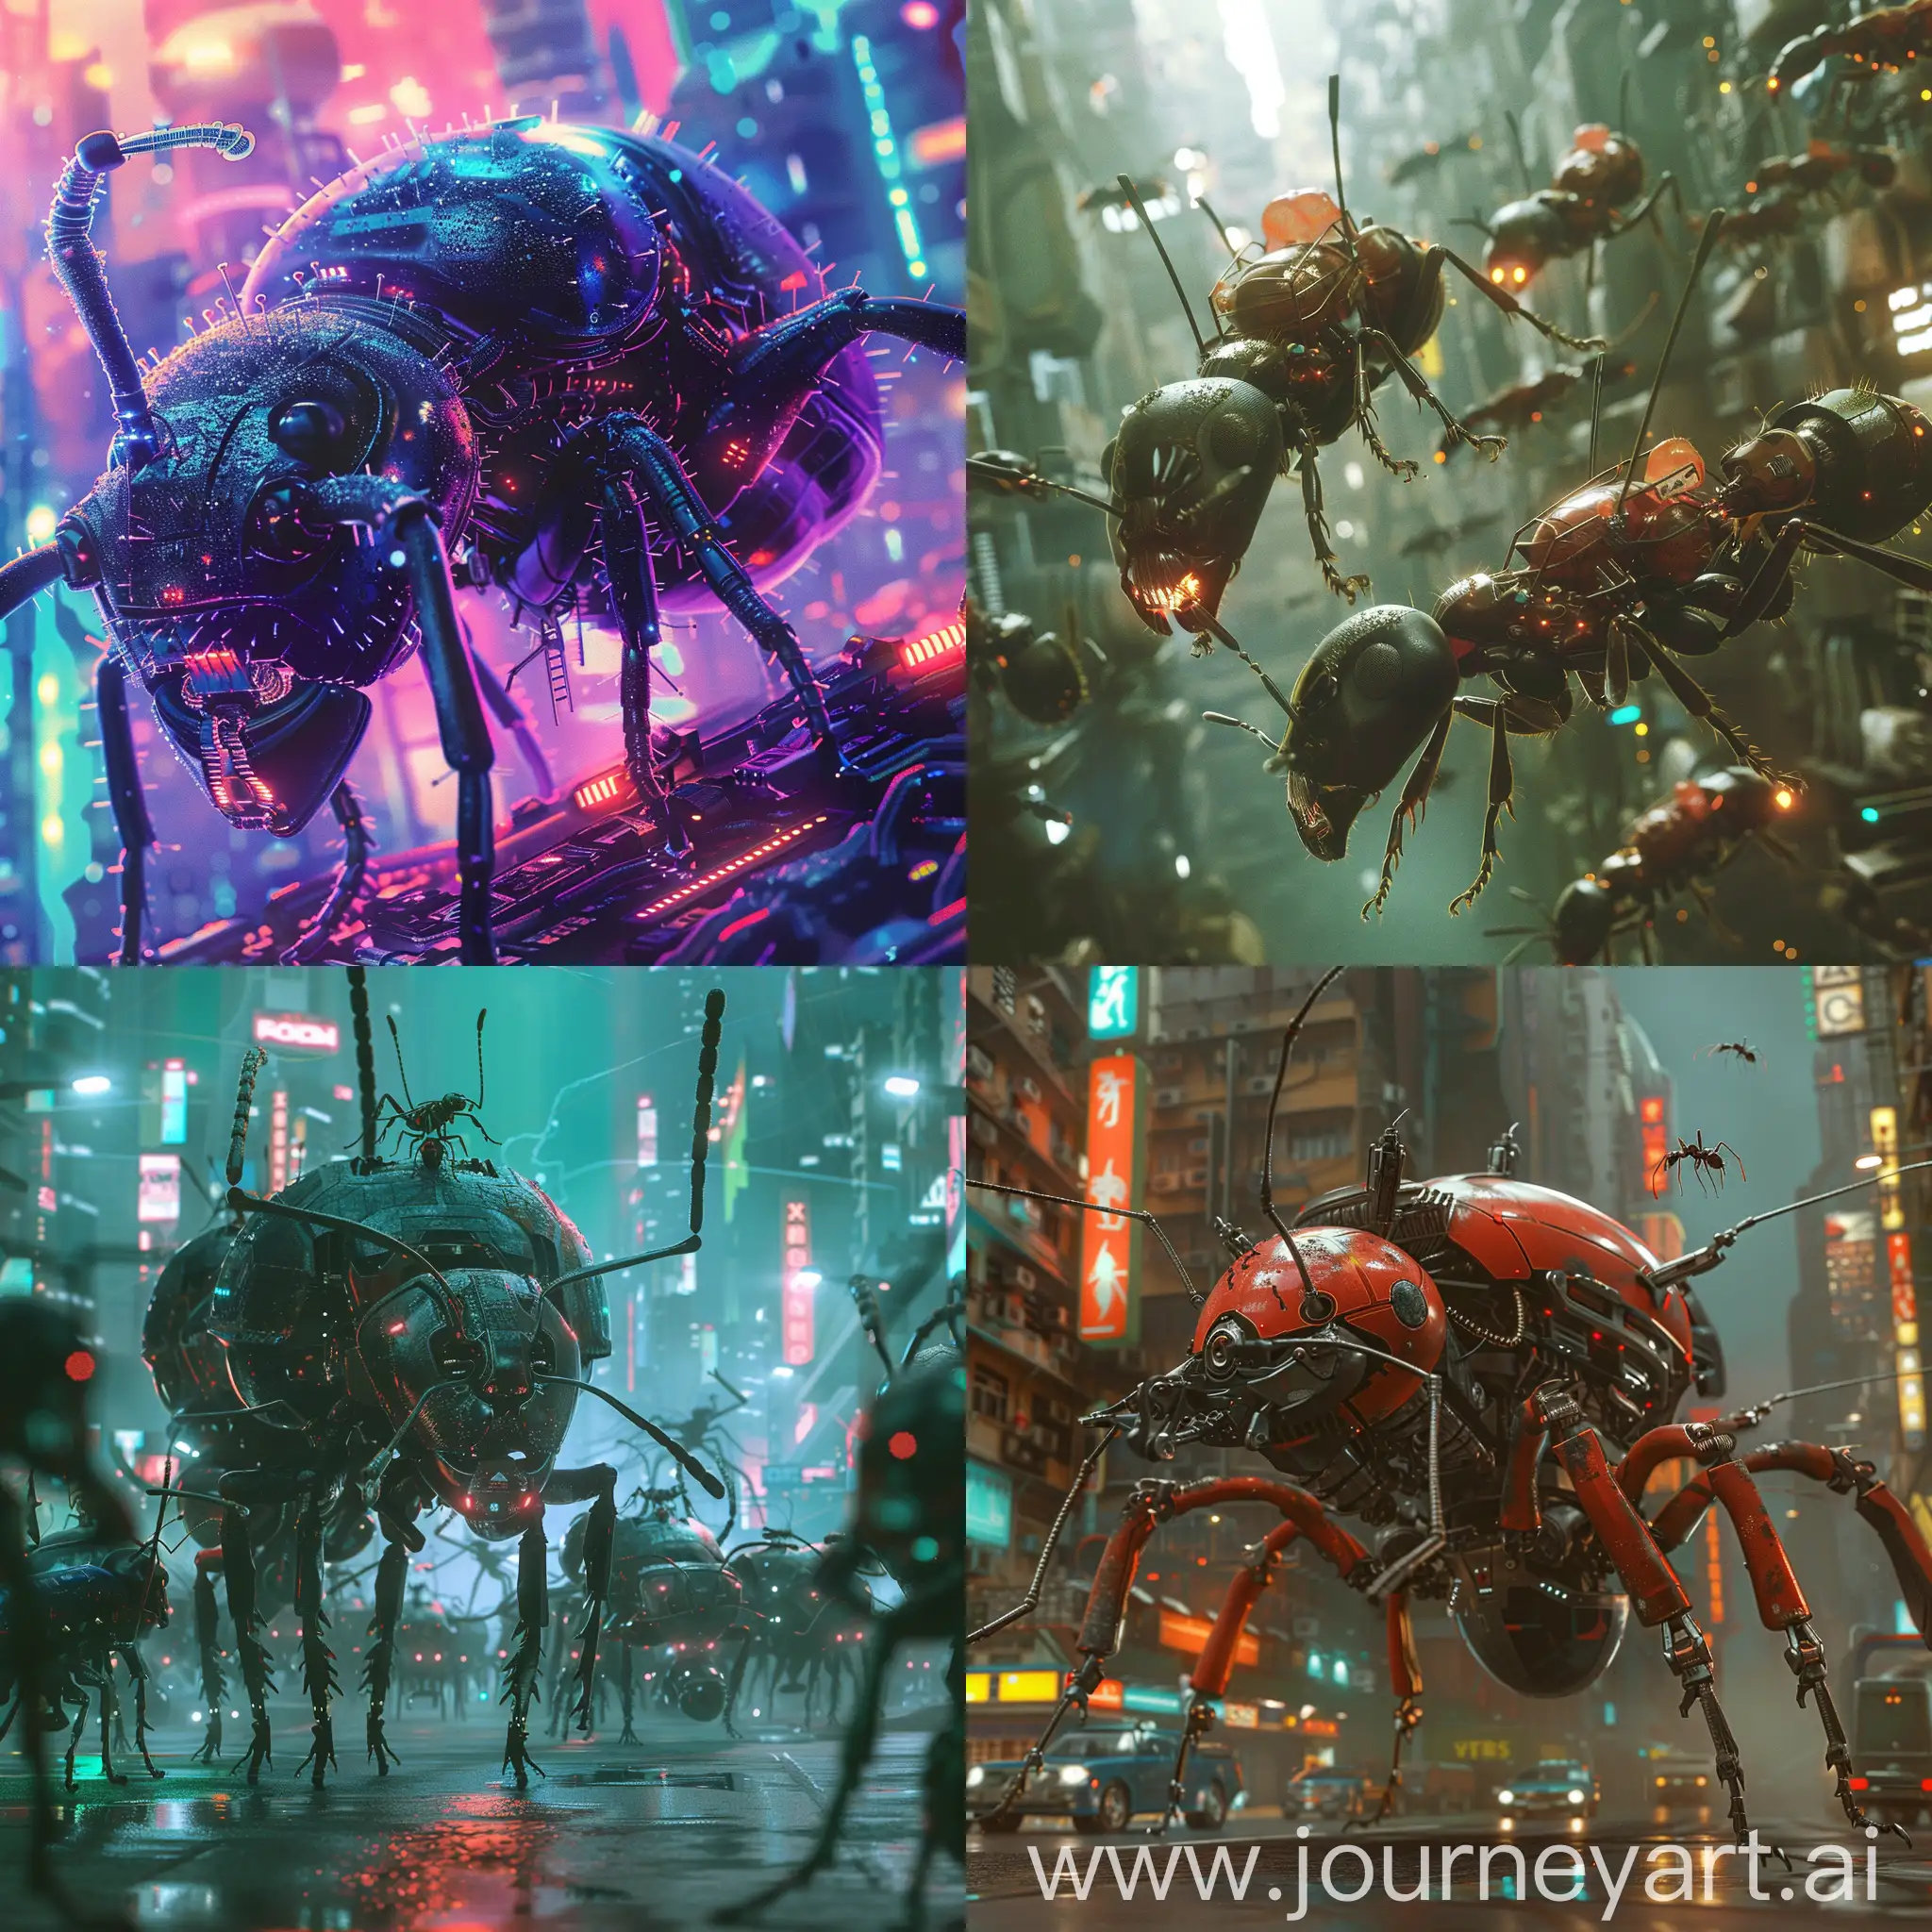 Futuristic-Cyberpunk-Cityscape-with-Antlike-Robotic-Workers